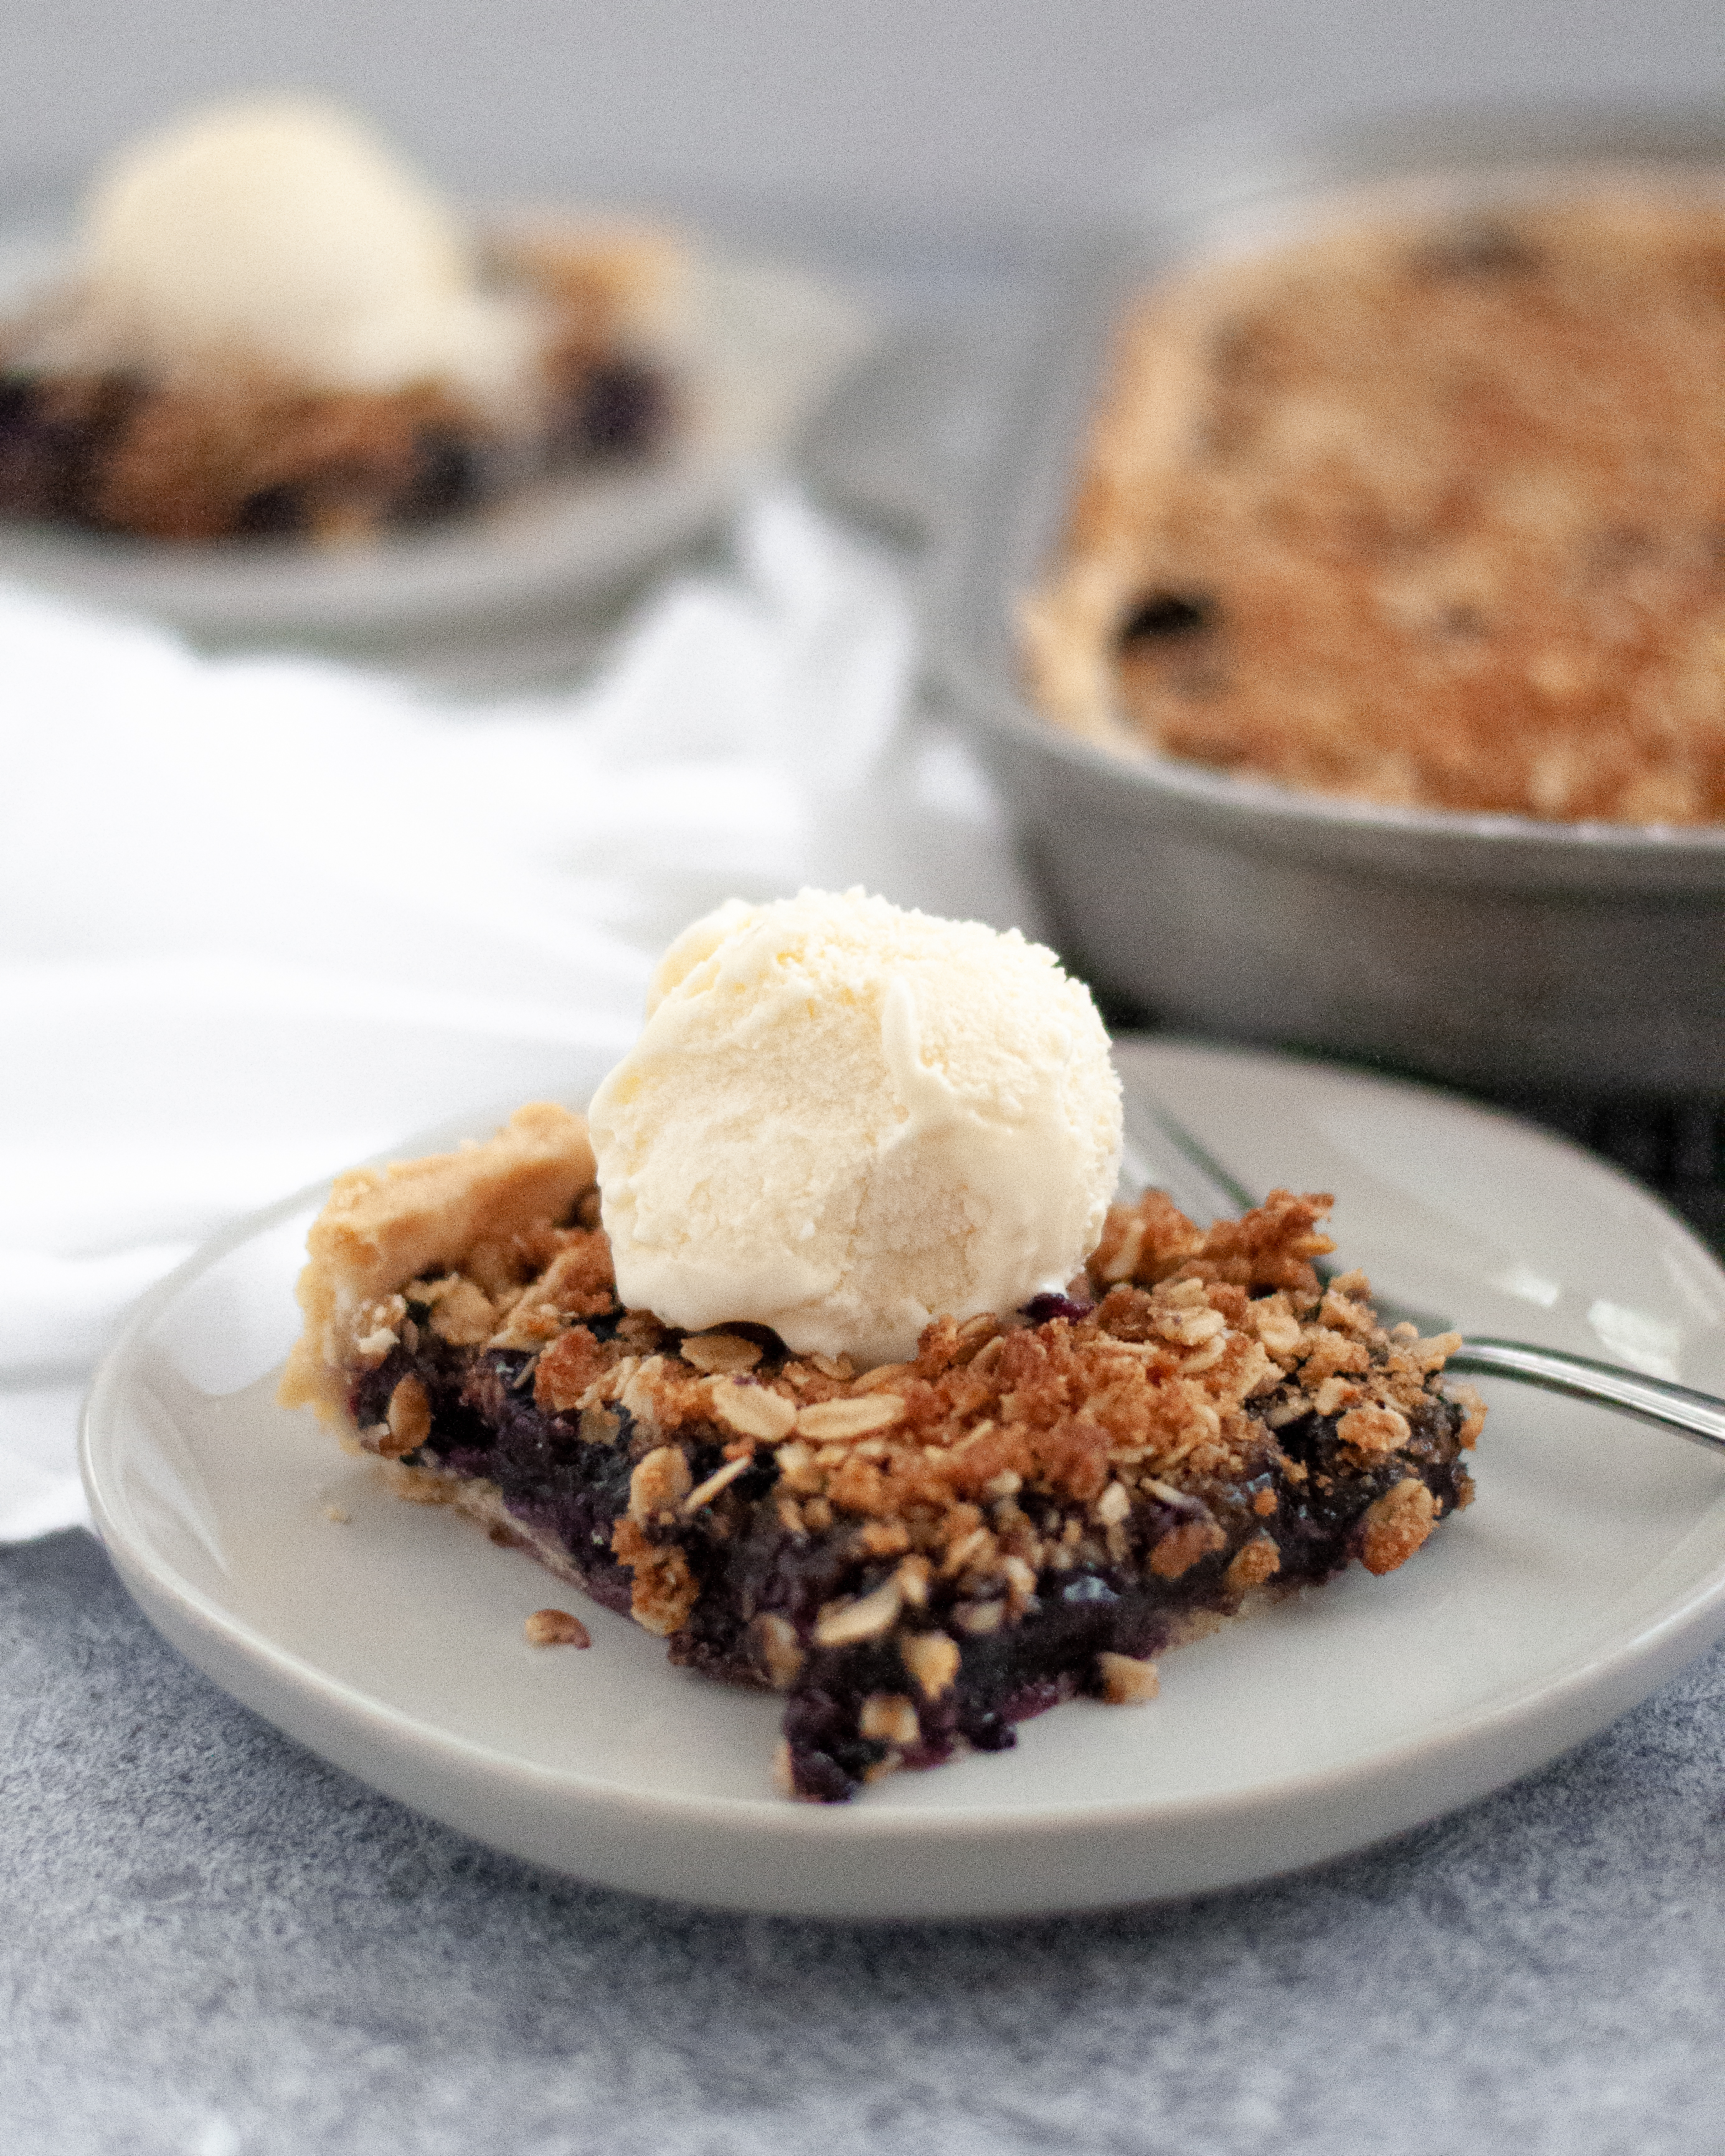 Close up of a slice of these blueberry pie bars. In the background you can see the pan holding the rest of the bluebery slab pie and another slice of blueberry pie bars on a plate. Each slice of this blueberry slab pie has a scoop of ice cream on top.